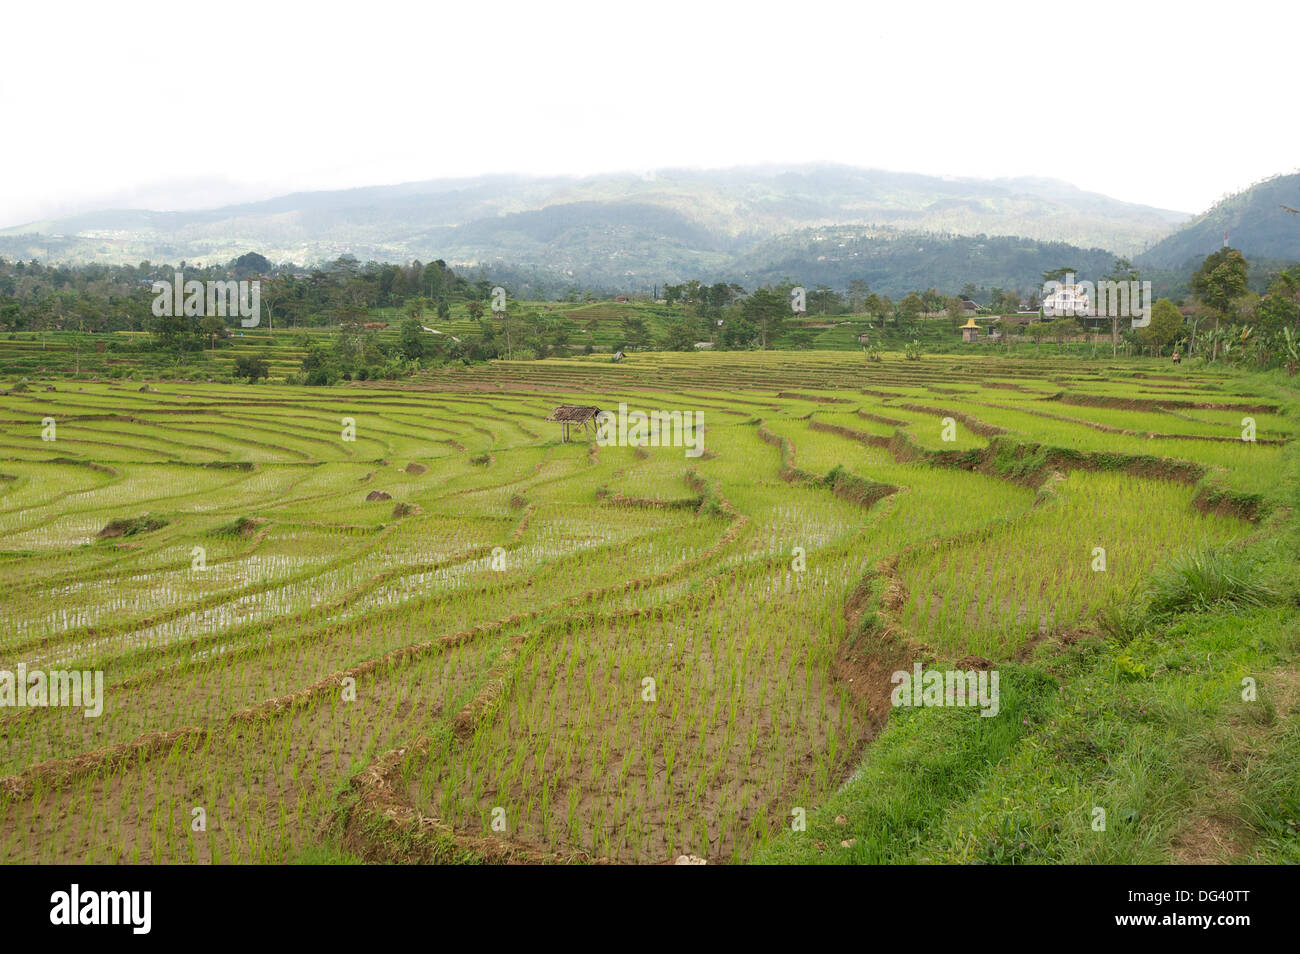 Rice paddy fields in shallow terraces, Surakarta district, Solo River valley, Java, Indonesia, Southeast Asia, Asia Stock Photo